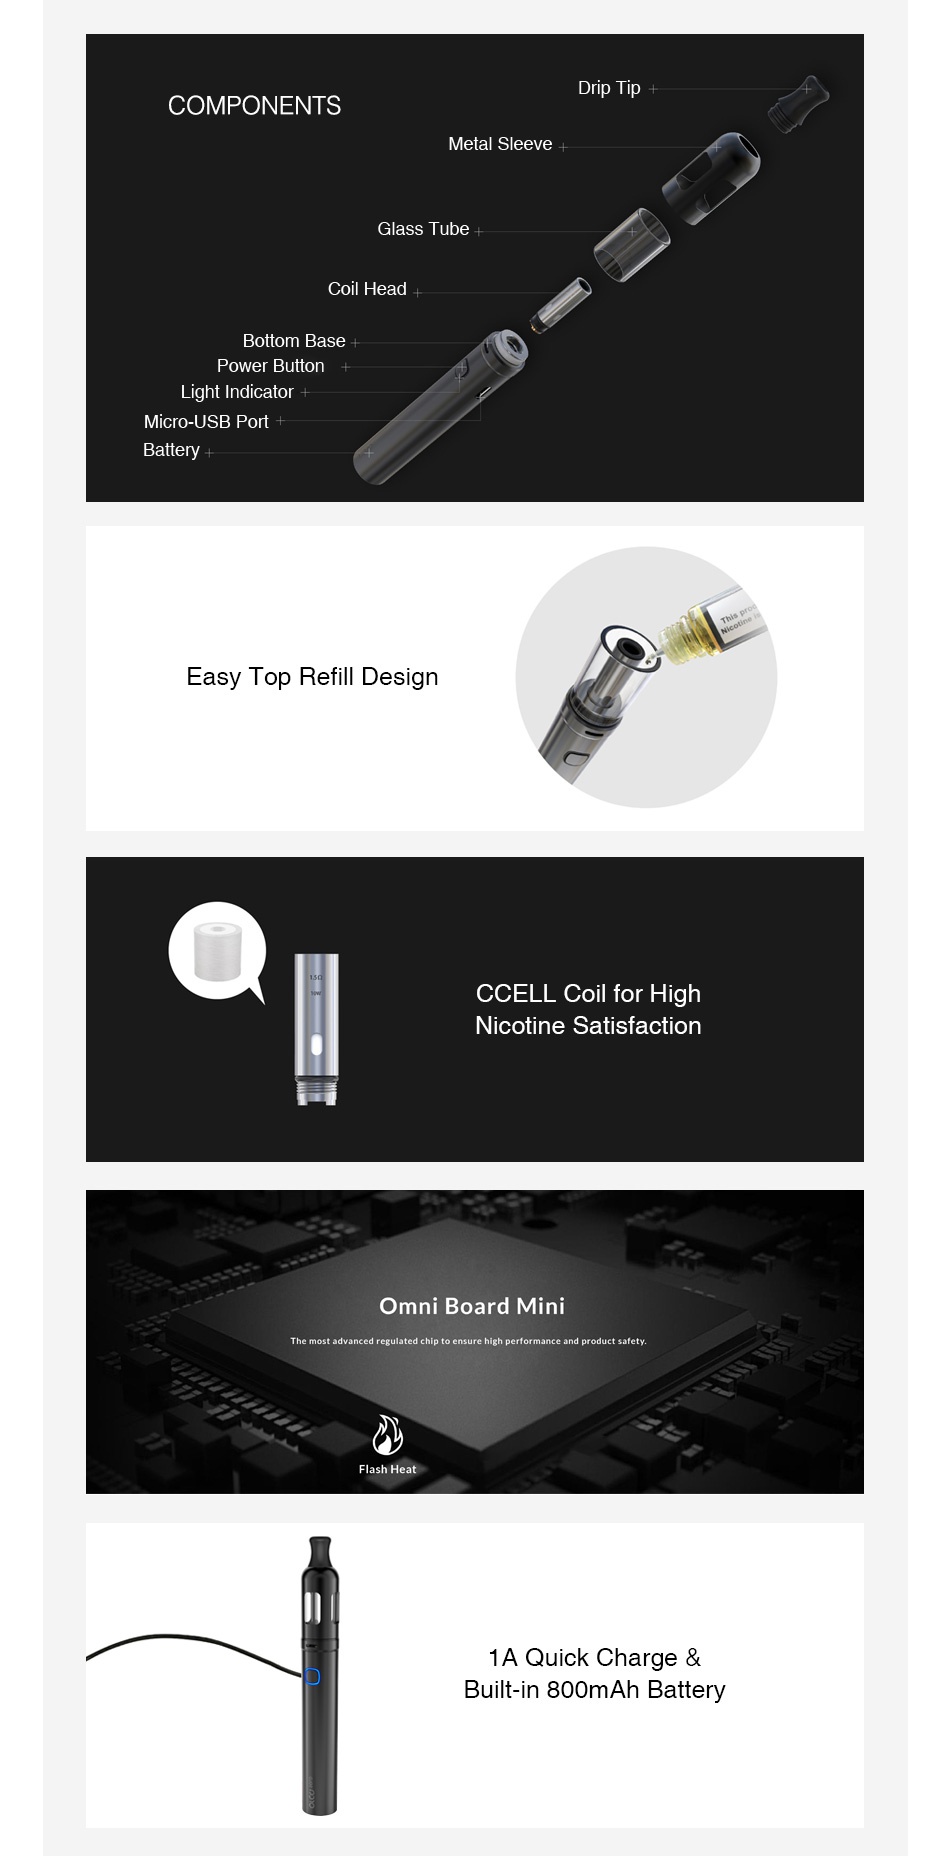 Vaporesso Orca Solo Starter Kit 800mAh COMPONENTS Metal Sleeve Glass Tube Coil Head t Bottom base t Power Button Light Indicat Micro USB Port Battery t Easy Top Refill Design CCELL Coil for high Nicotine satisfaction Omni Board mini The most advanced regulated chip to ensure high performance and product safety  1A Quick Charge Built in 800mAh Battery